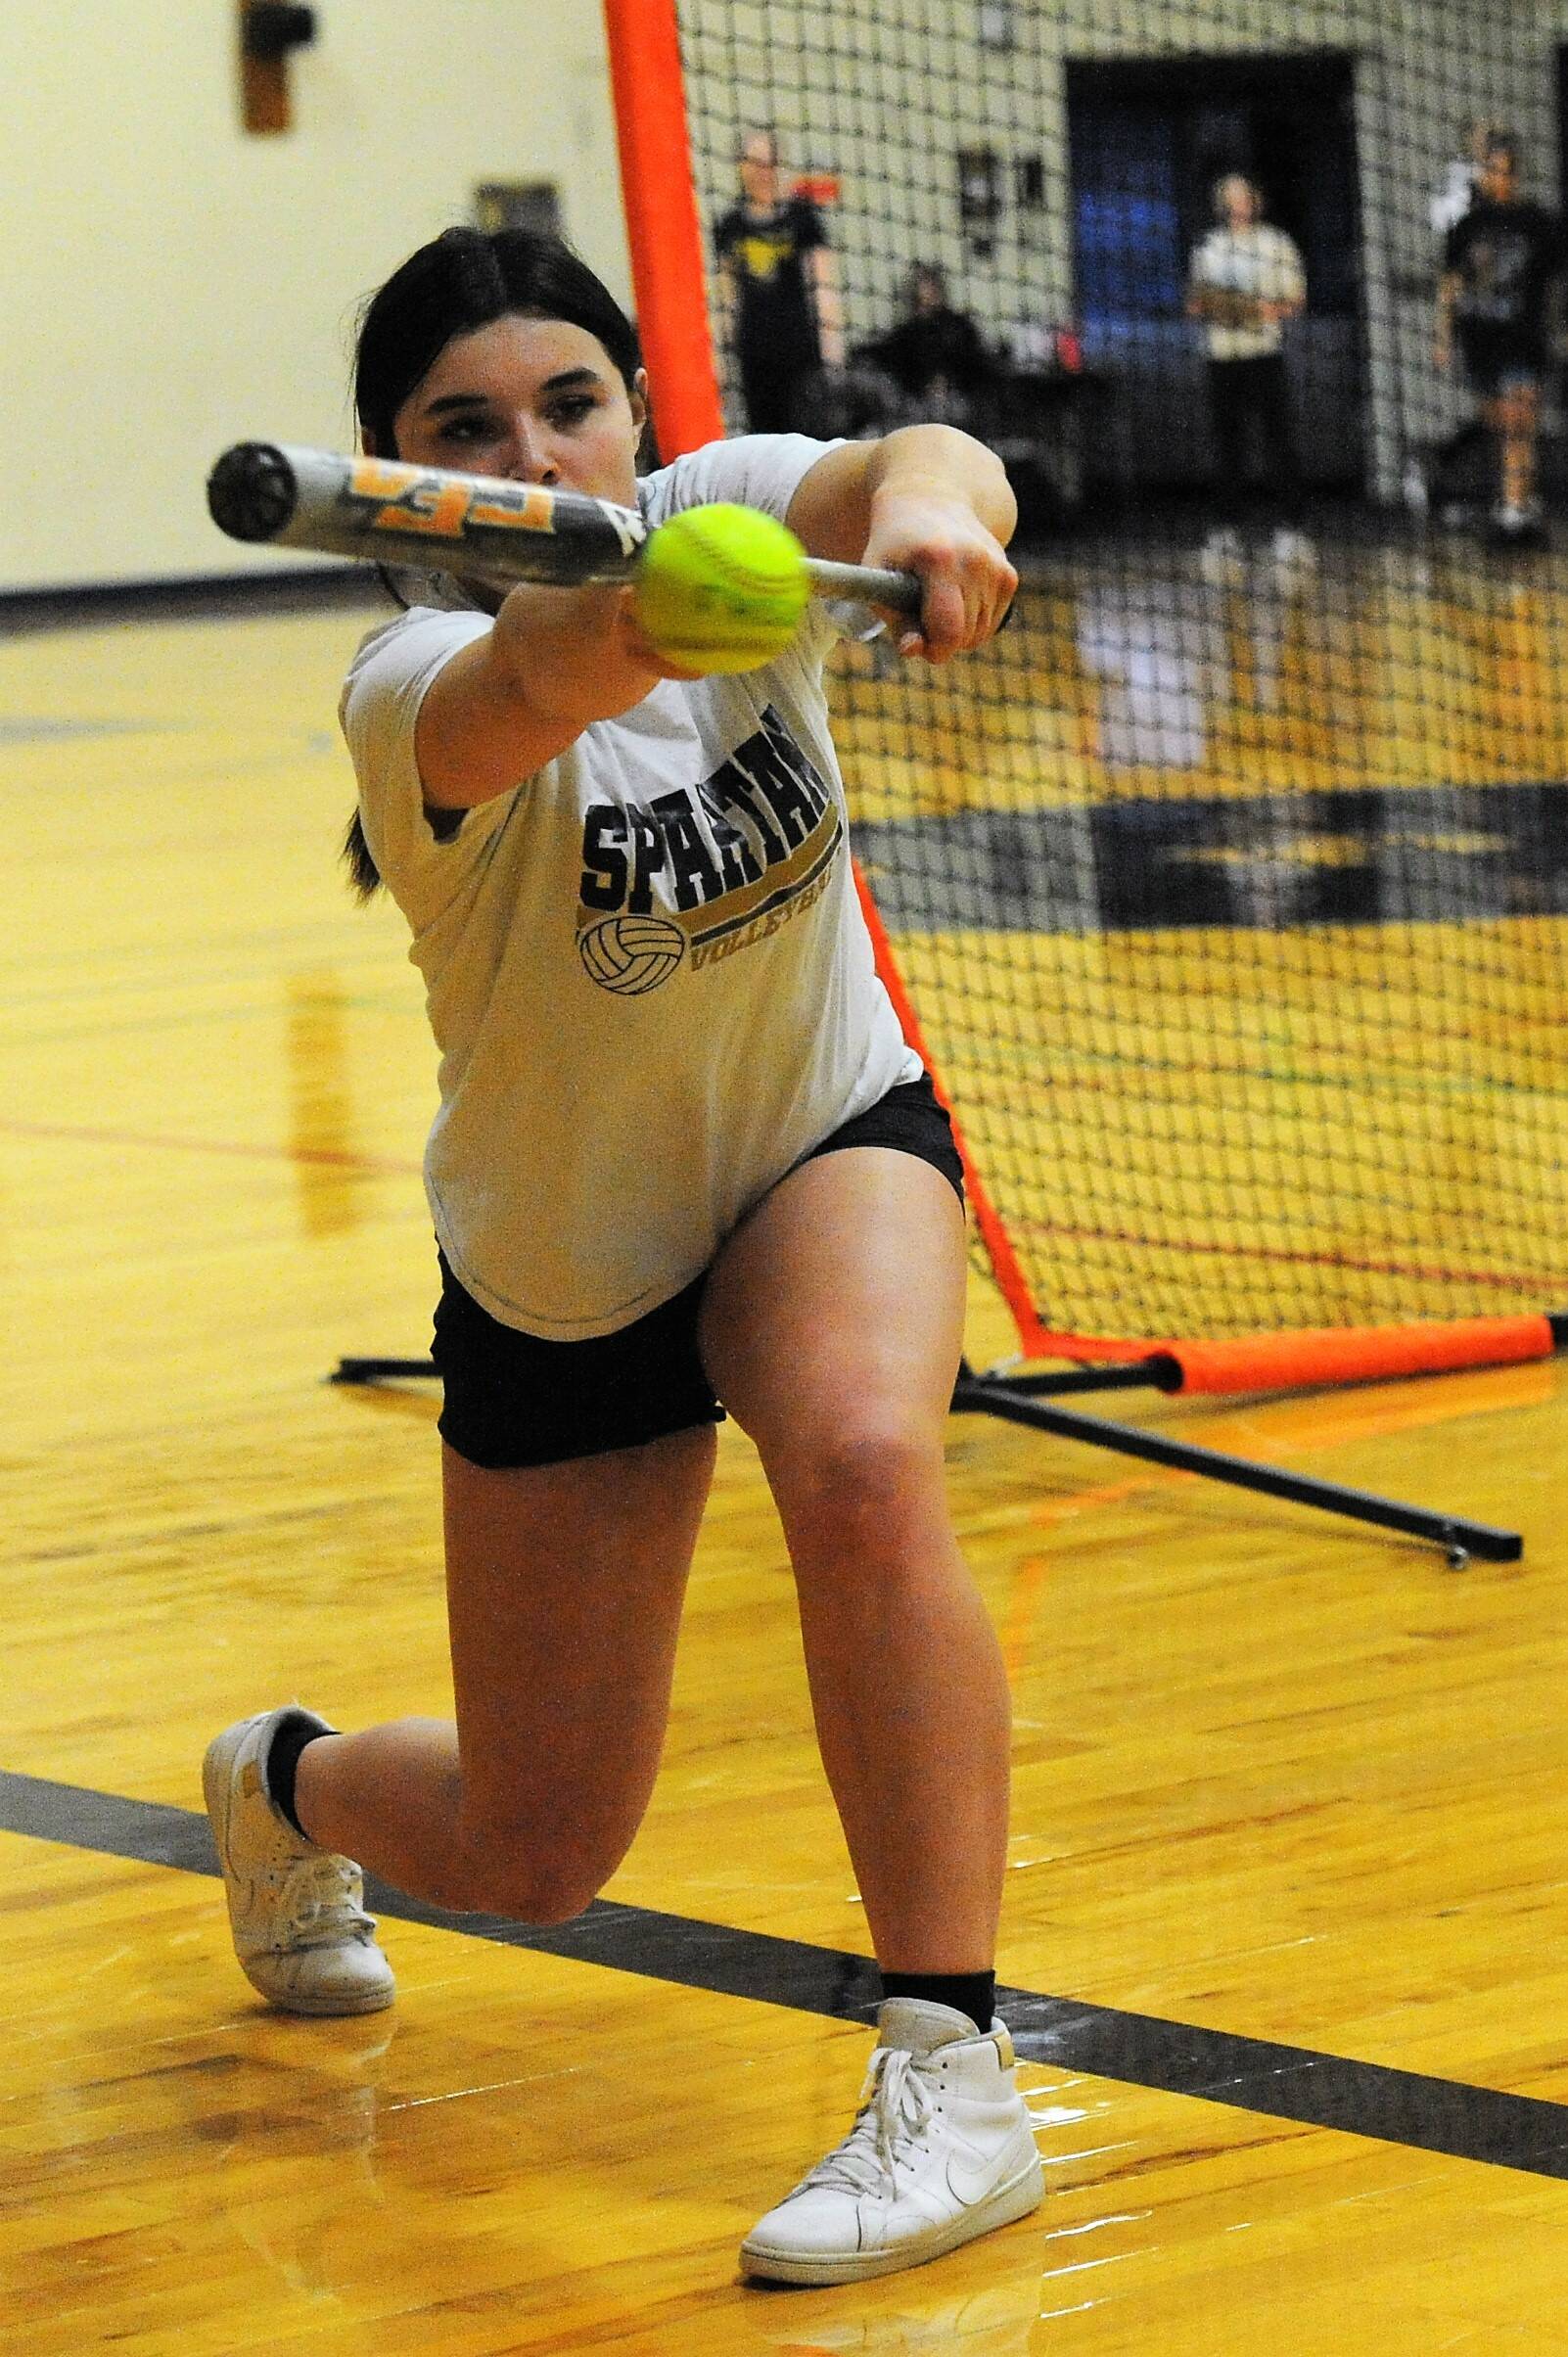 Softball player Kaidence Rigby goes through bunting drills in preparation for the upcoming fastpitch season. Some 21 athletes are participating. Forks finished third in state last season. Photo by Lonnie Archibald